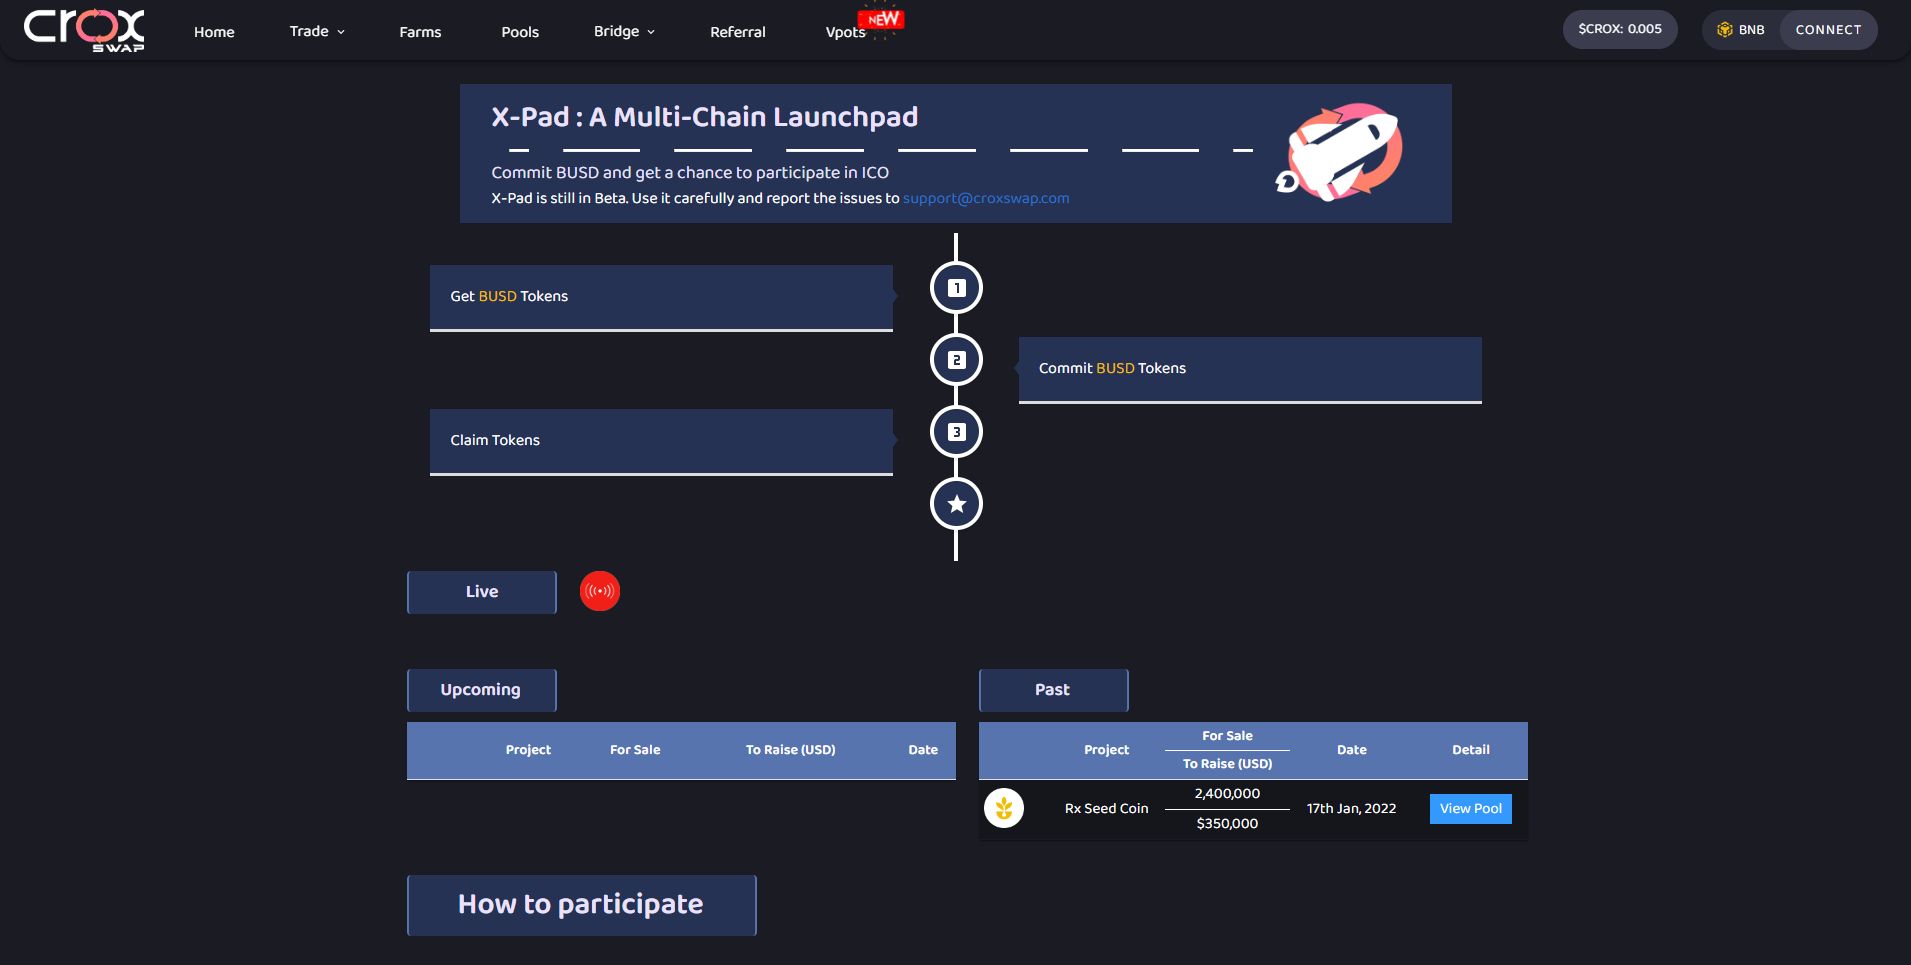 cro, Ln LU Farms fe LL LE] .- fe tT EL LUT ad
re

X-Pad : A Multi-Chain Launchpad

Commit BUSD and get a chance to participate in ICO
X-Pad 1s still in Beta. Use &amp; carefully and report the issues to

Get BUSD Tokens O
© Commit BUSD Tokens.
ro 0

| = 1 @®

2.400000
sew Com Se
REiLre

How to participate |